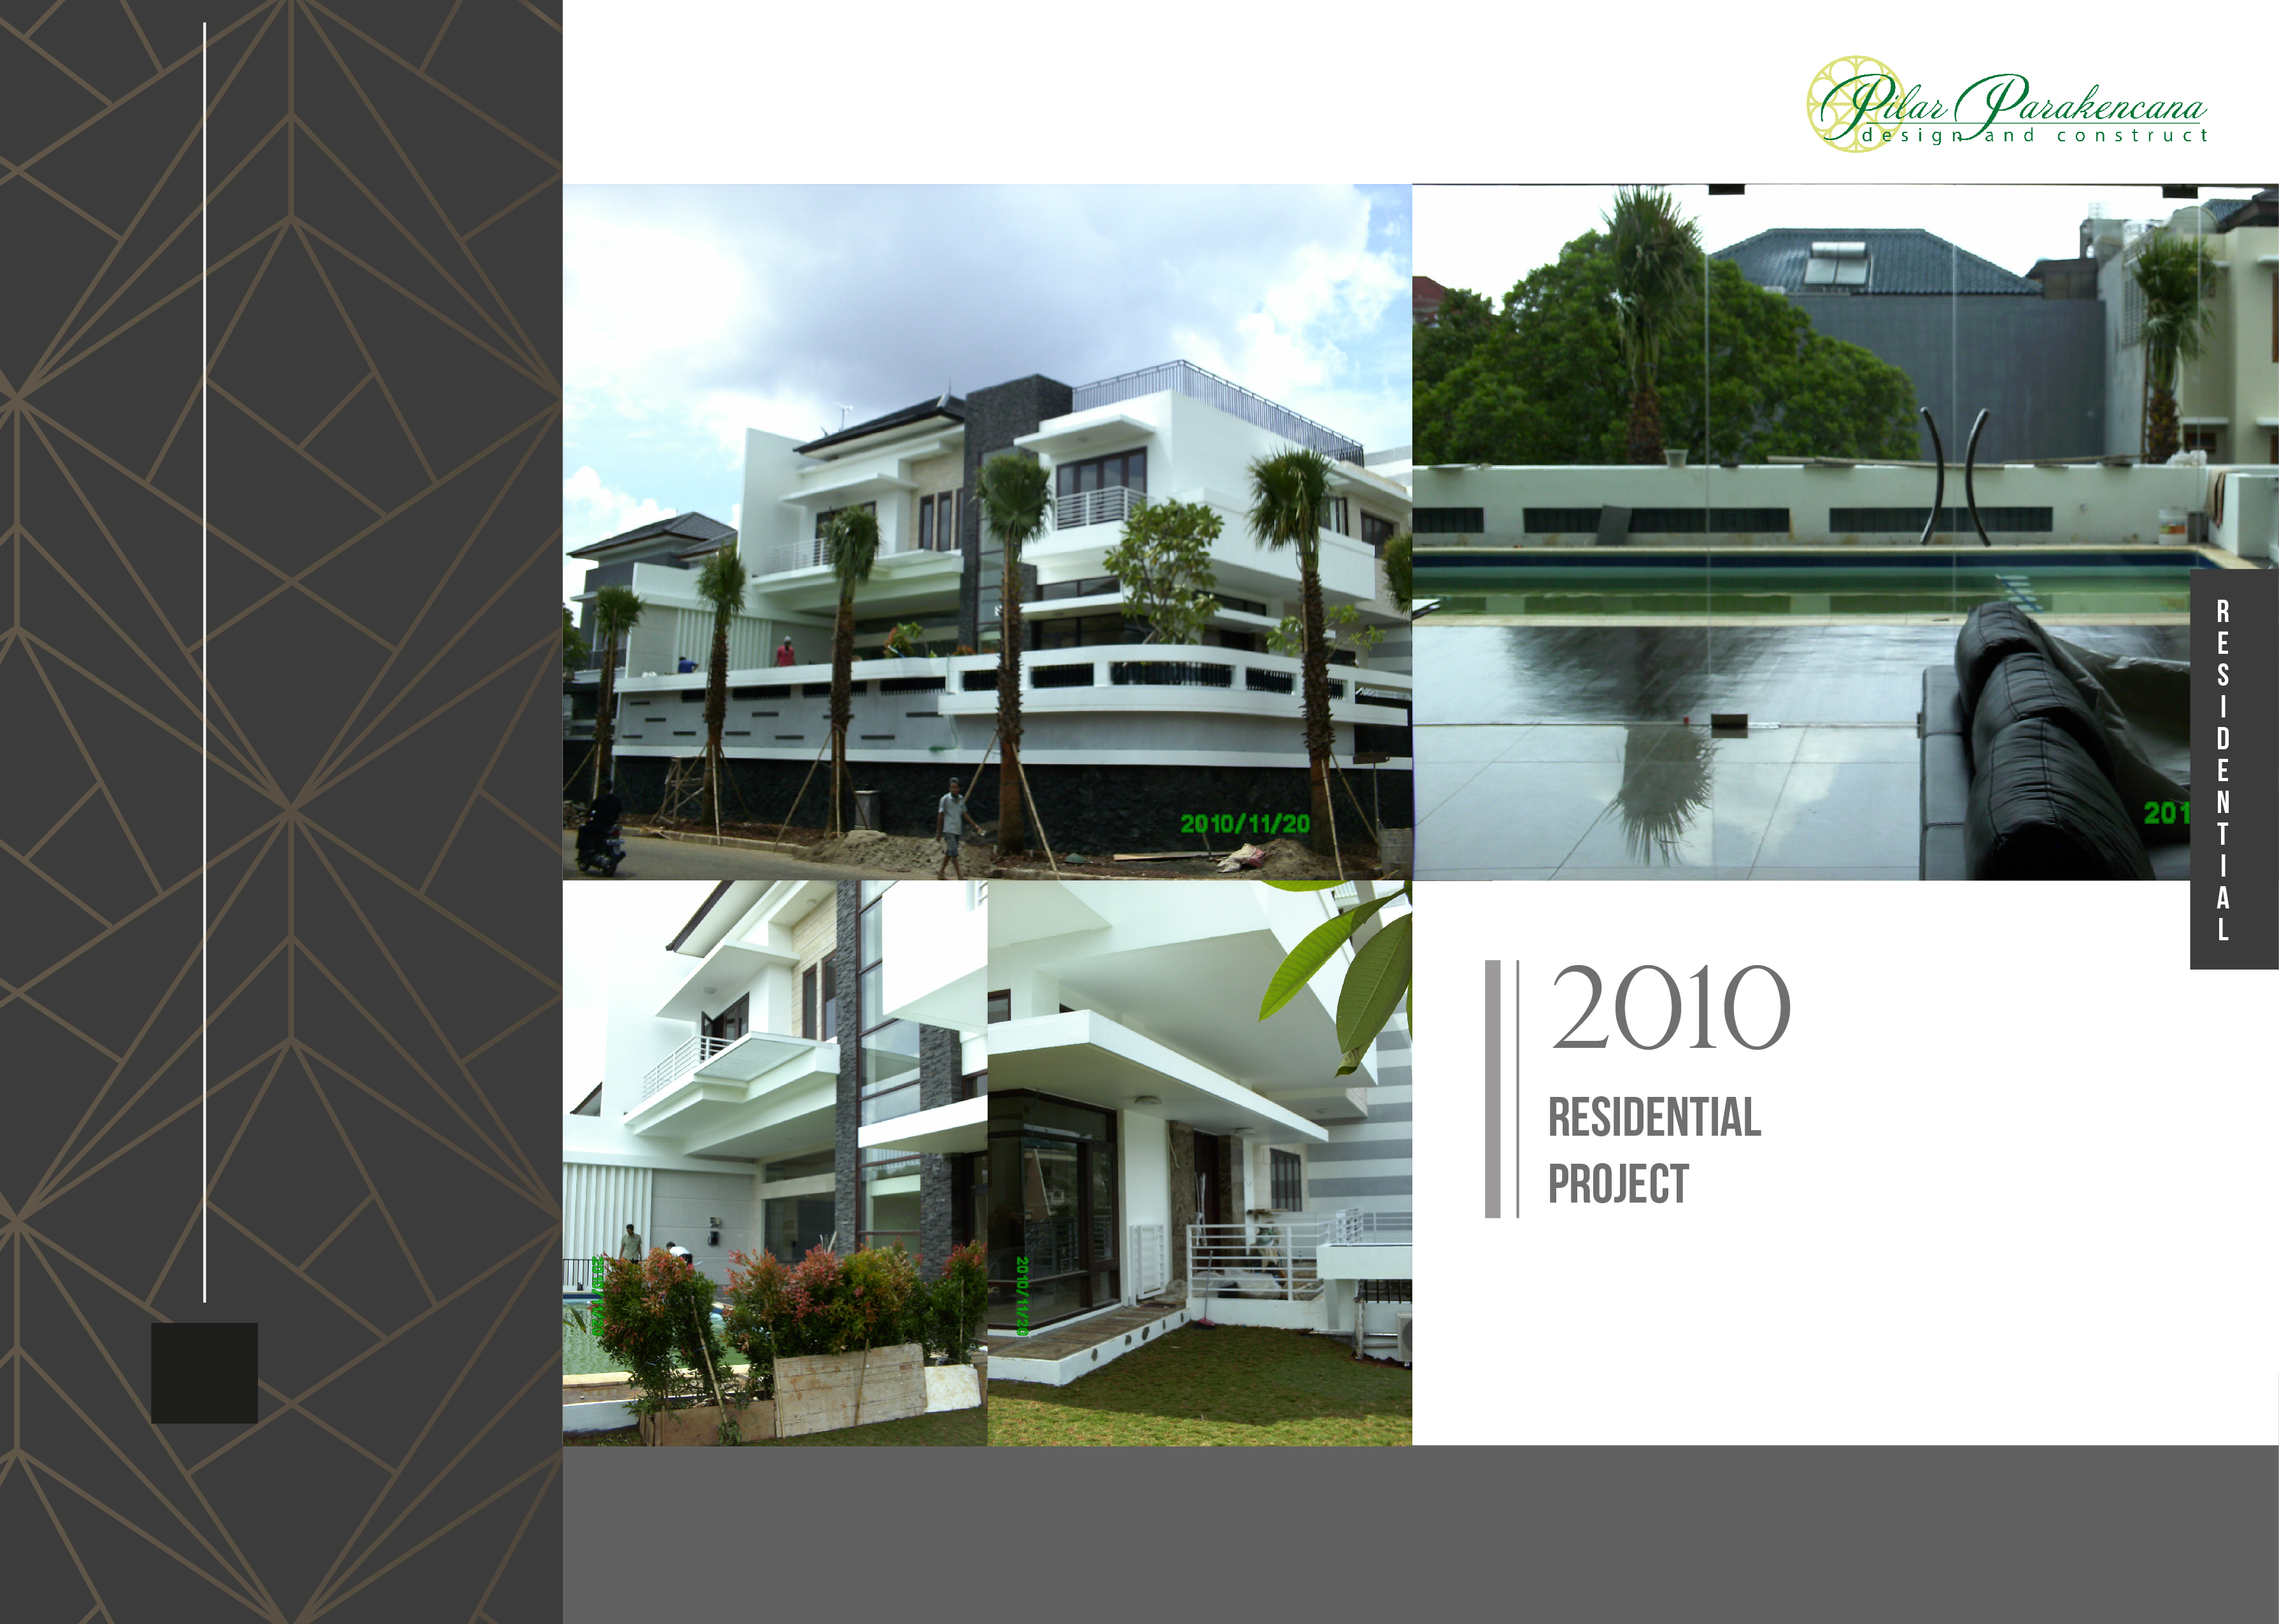 Residential Project - 2010